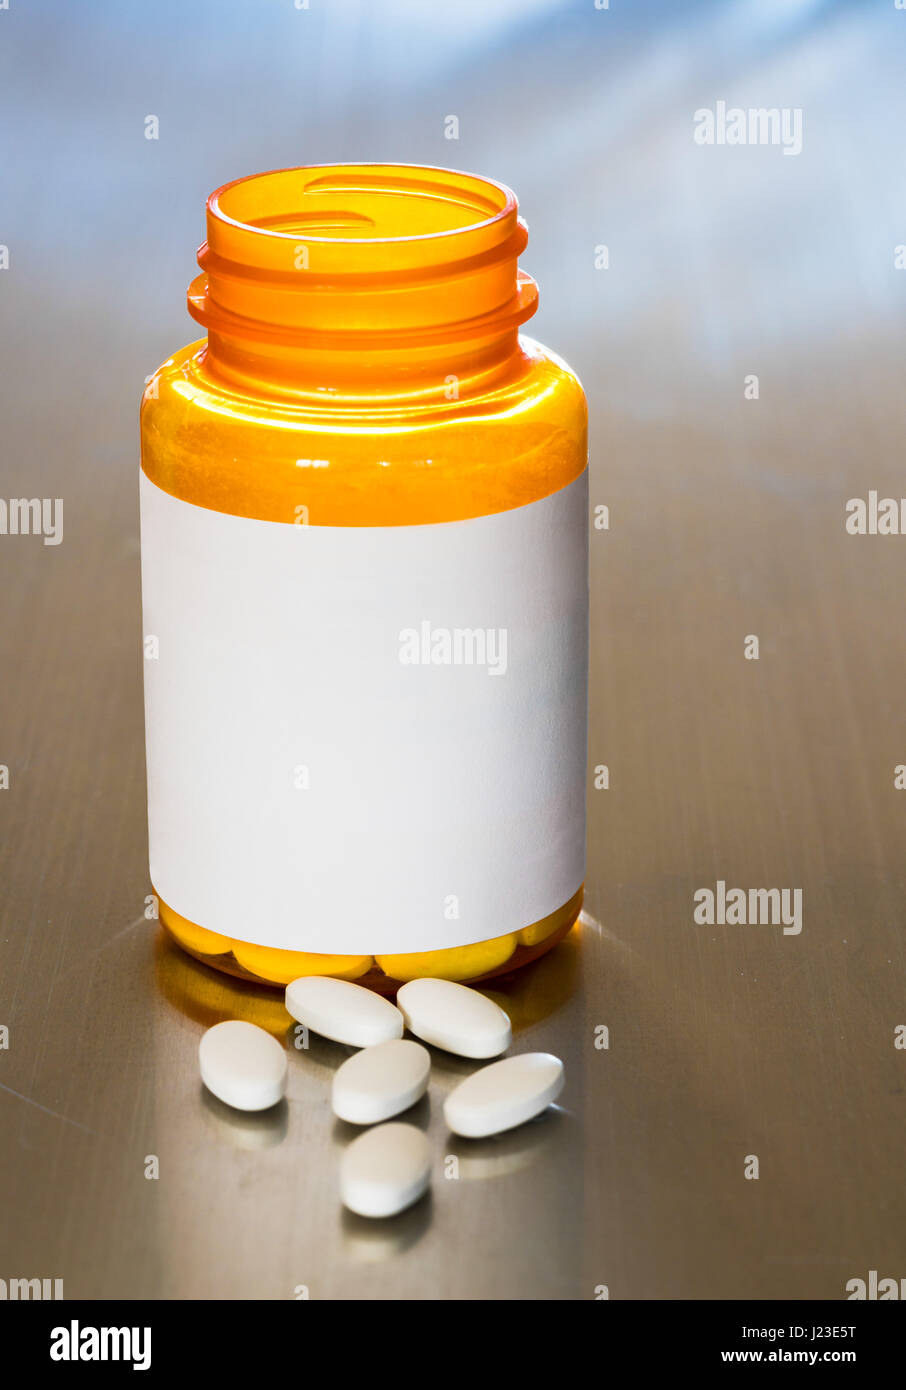 Pill bottle with blank label and white pills or tablets Stock Photo